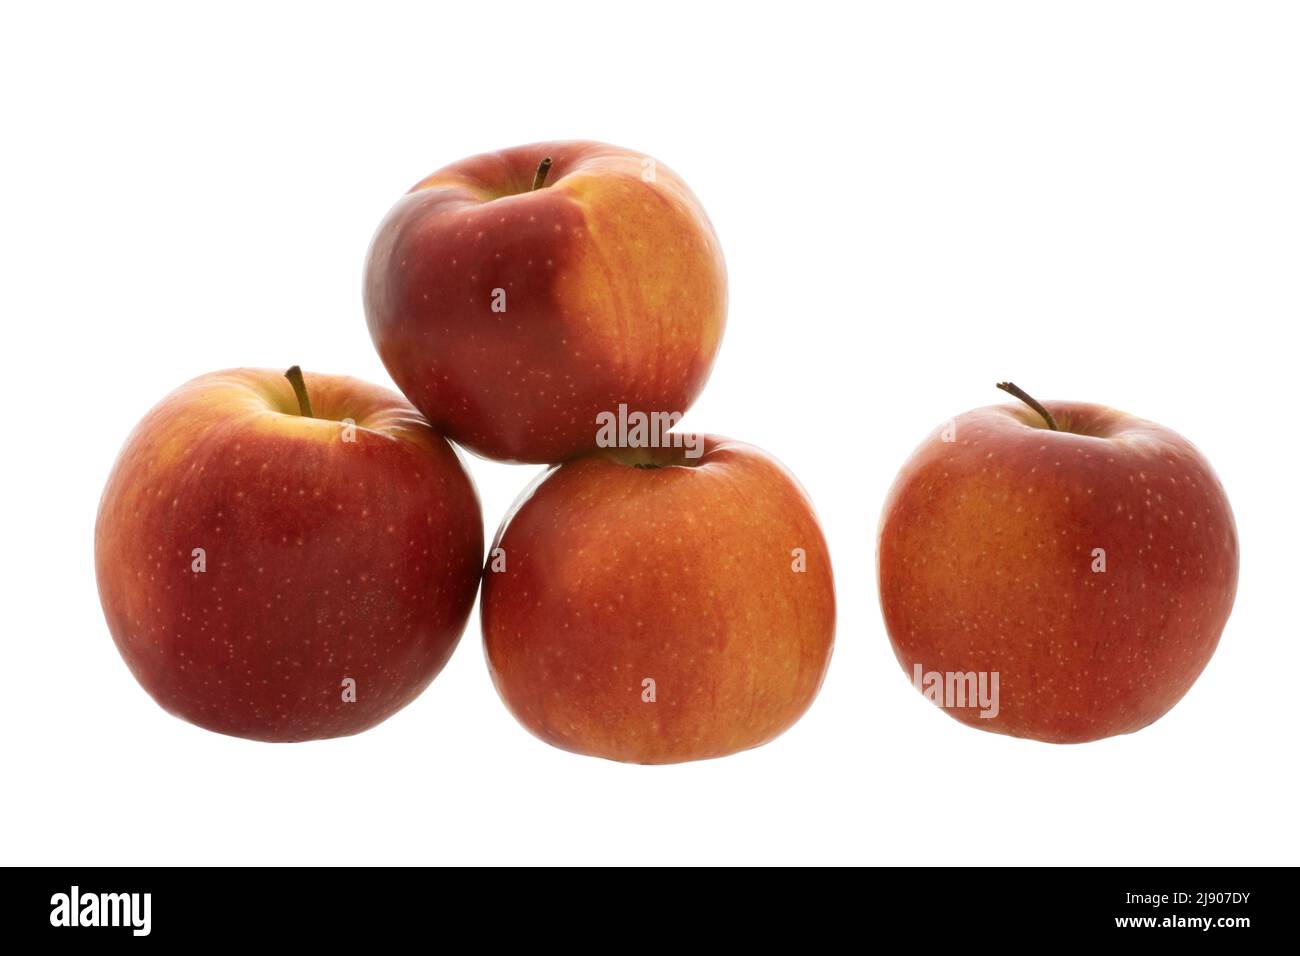 Fruit image four red ripe apples on white background Stock Photo